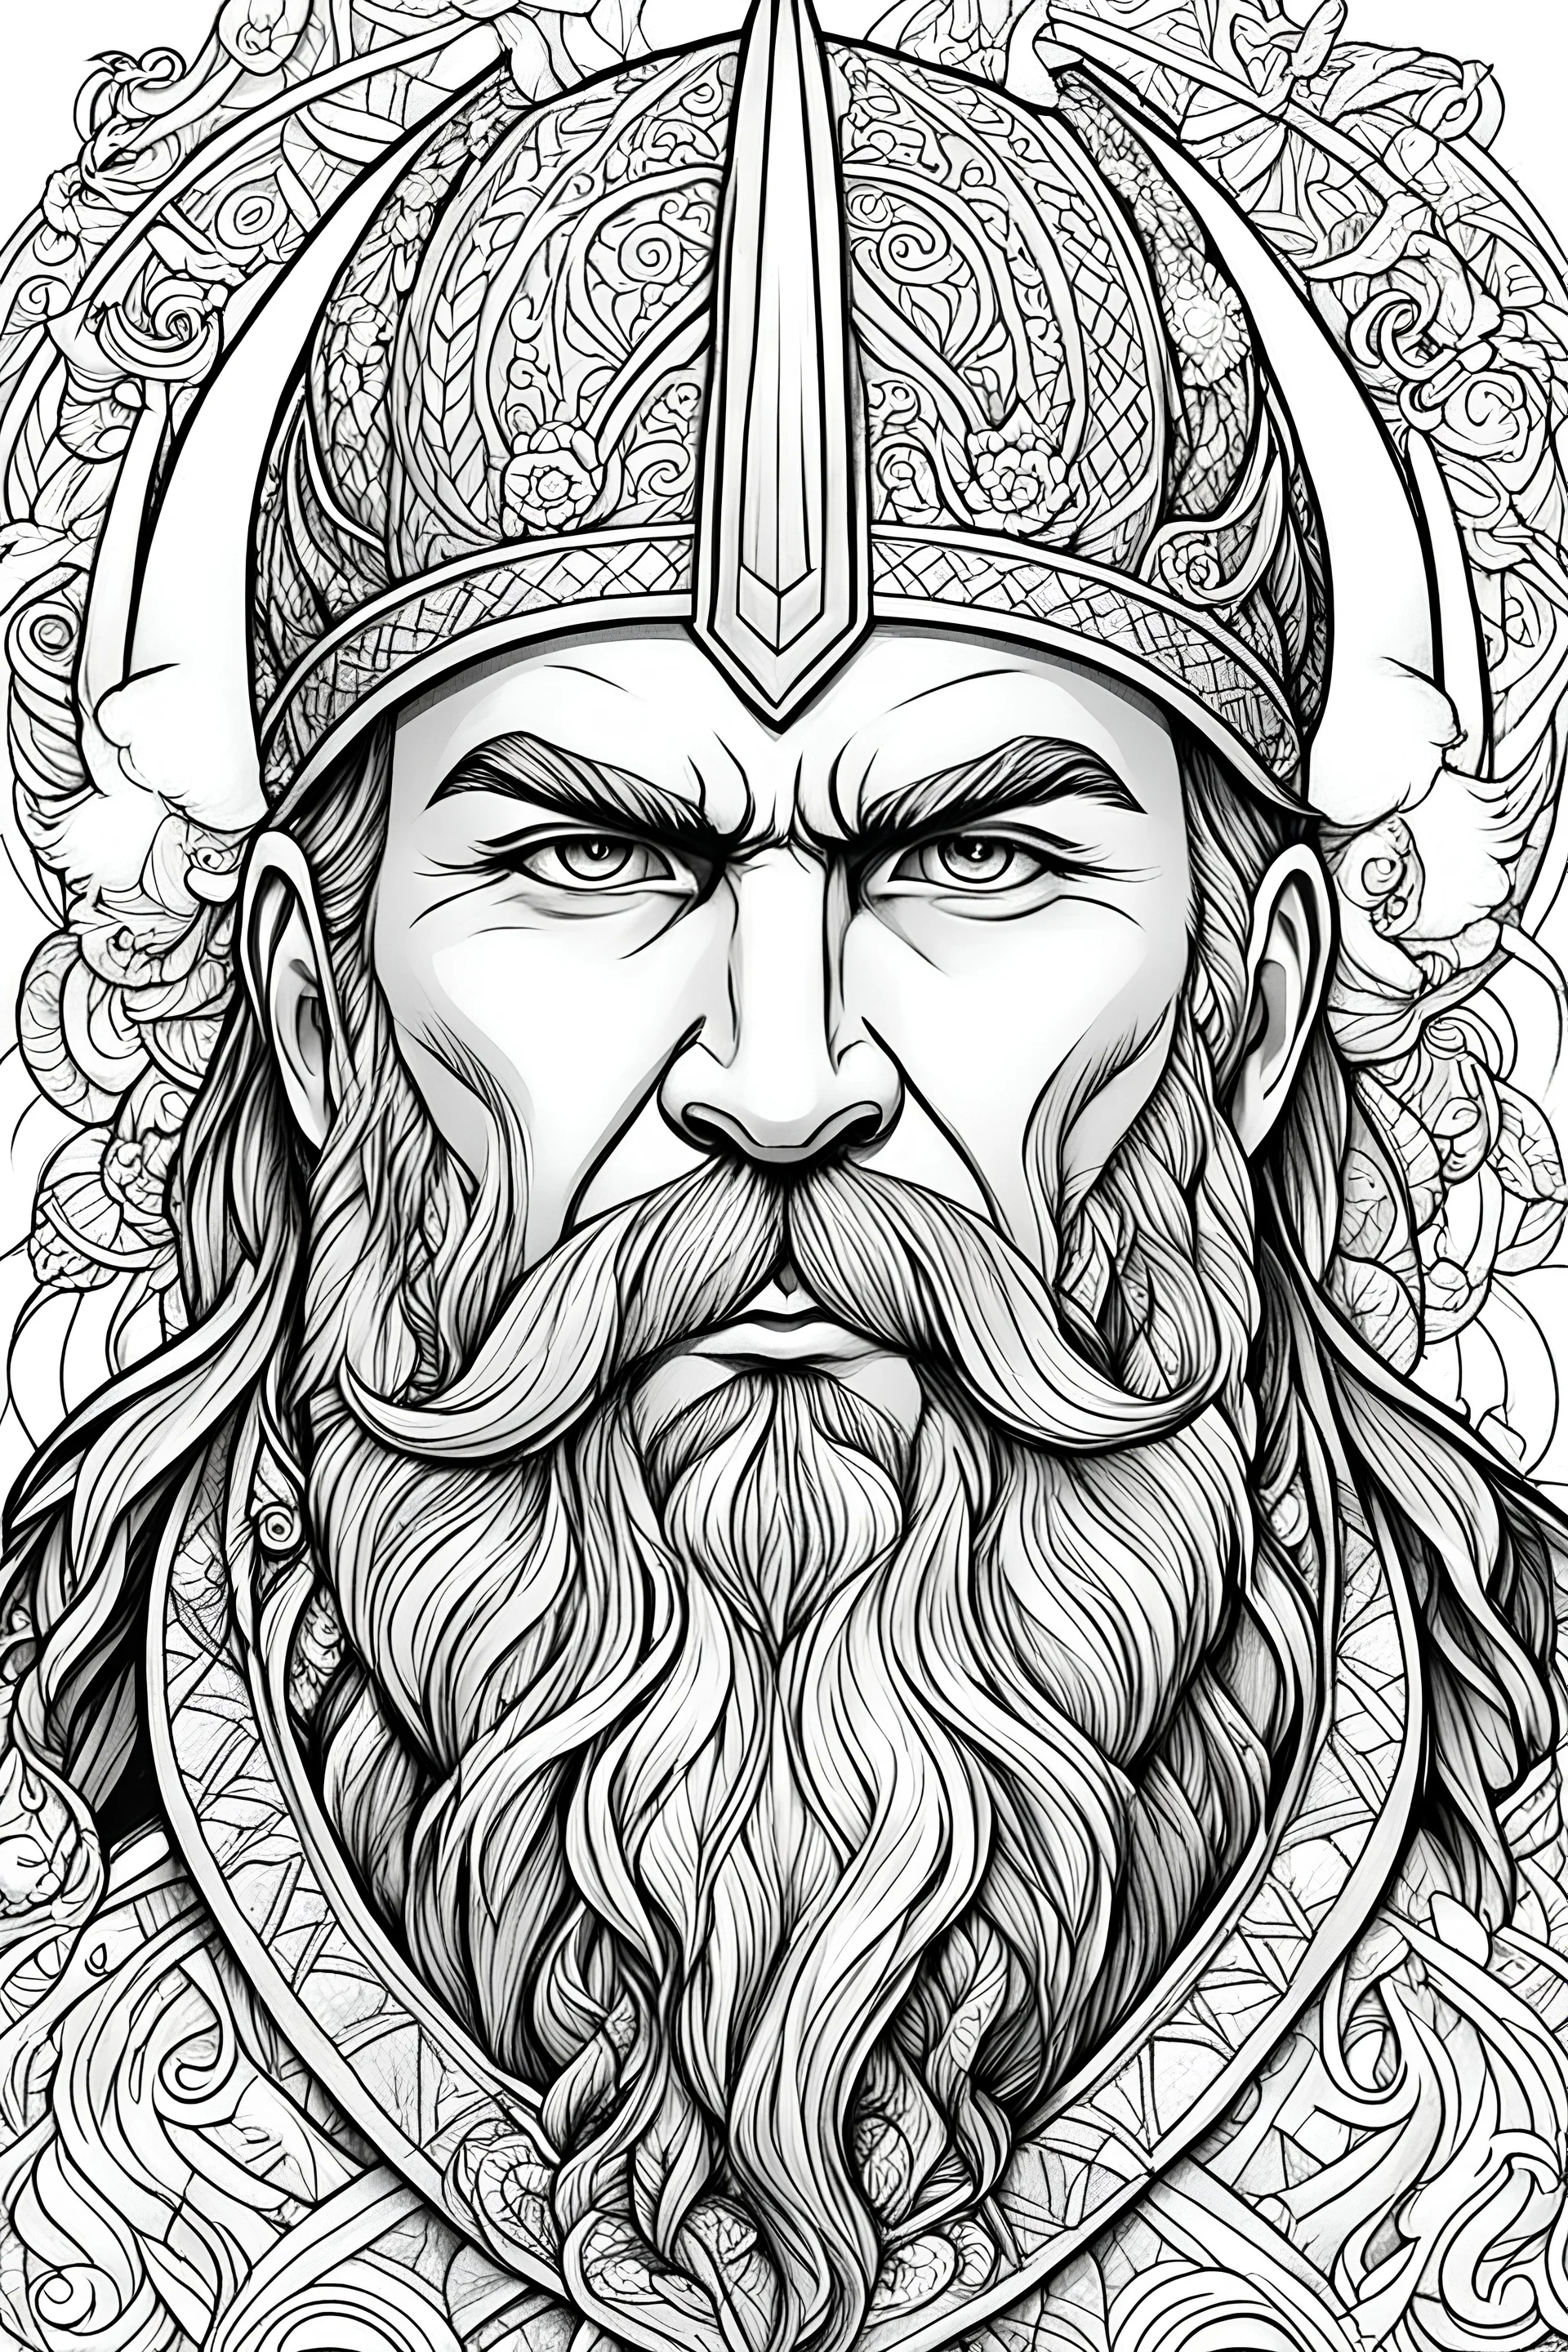 b/w outline art coloring book page, coloring pages, Vikings, white background, Sketch style (((((white background))))), only use outline, cartoon style, line art, coloring book, clean line art, Sketch style, line-art